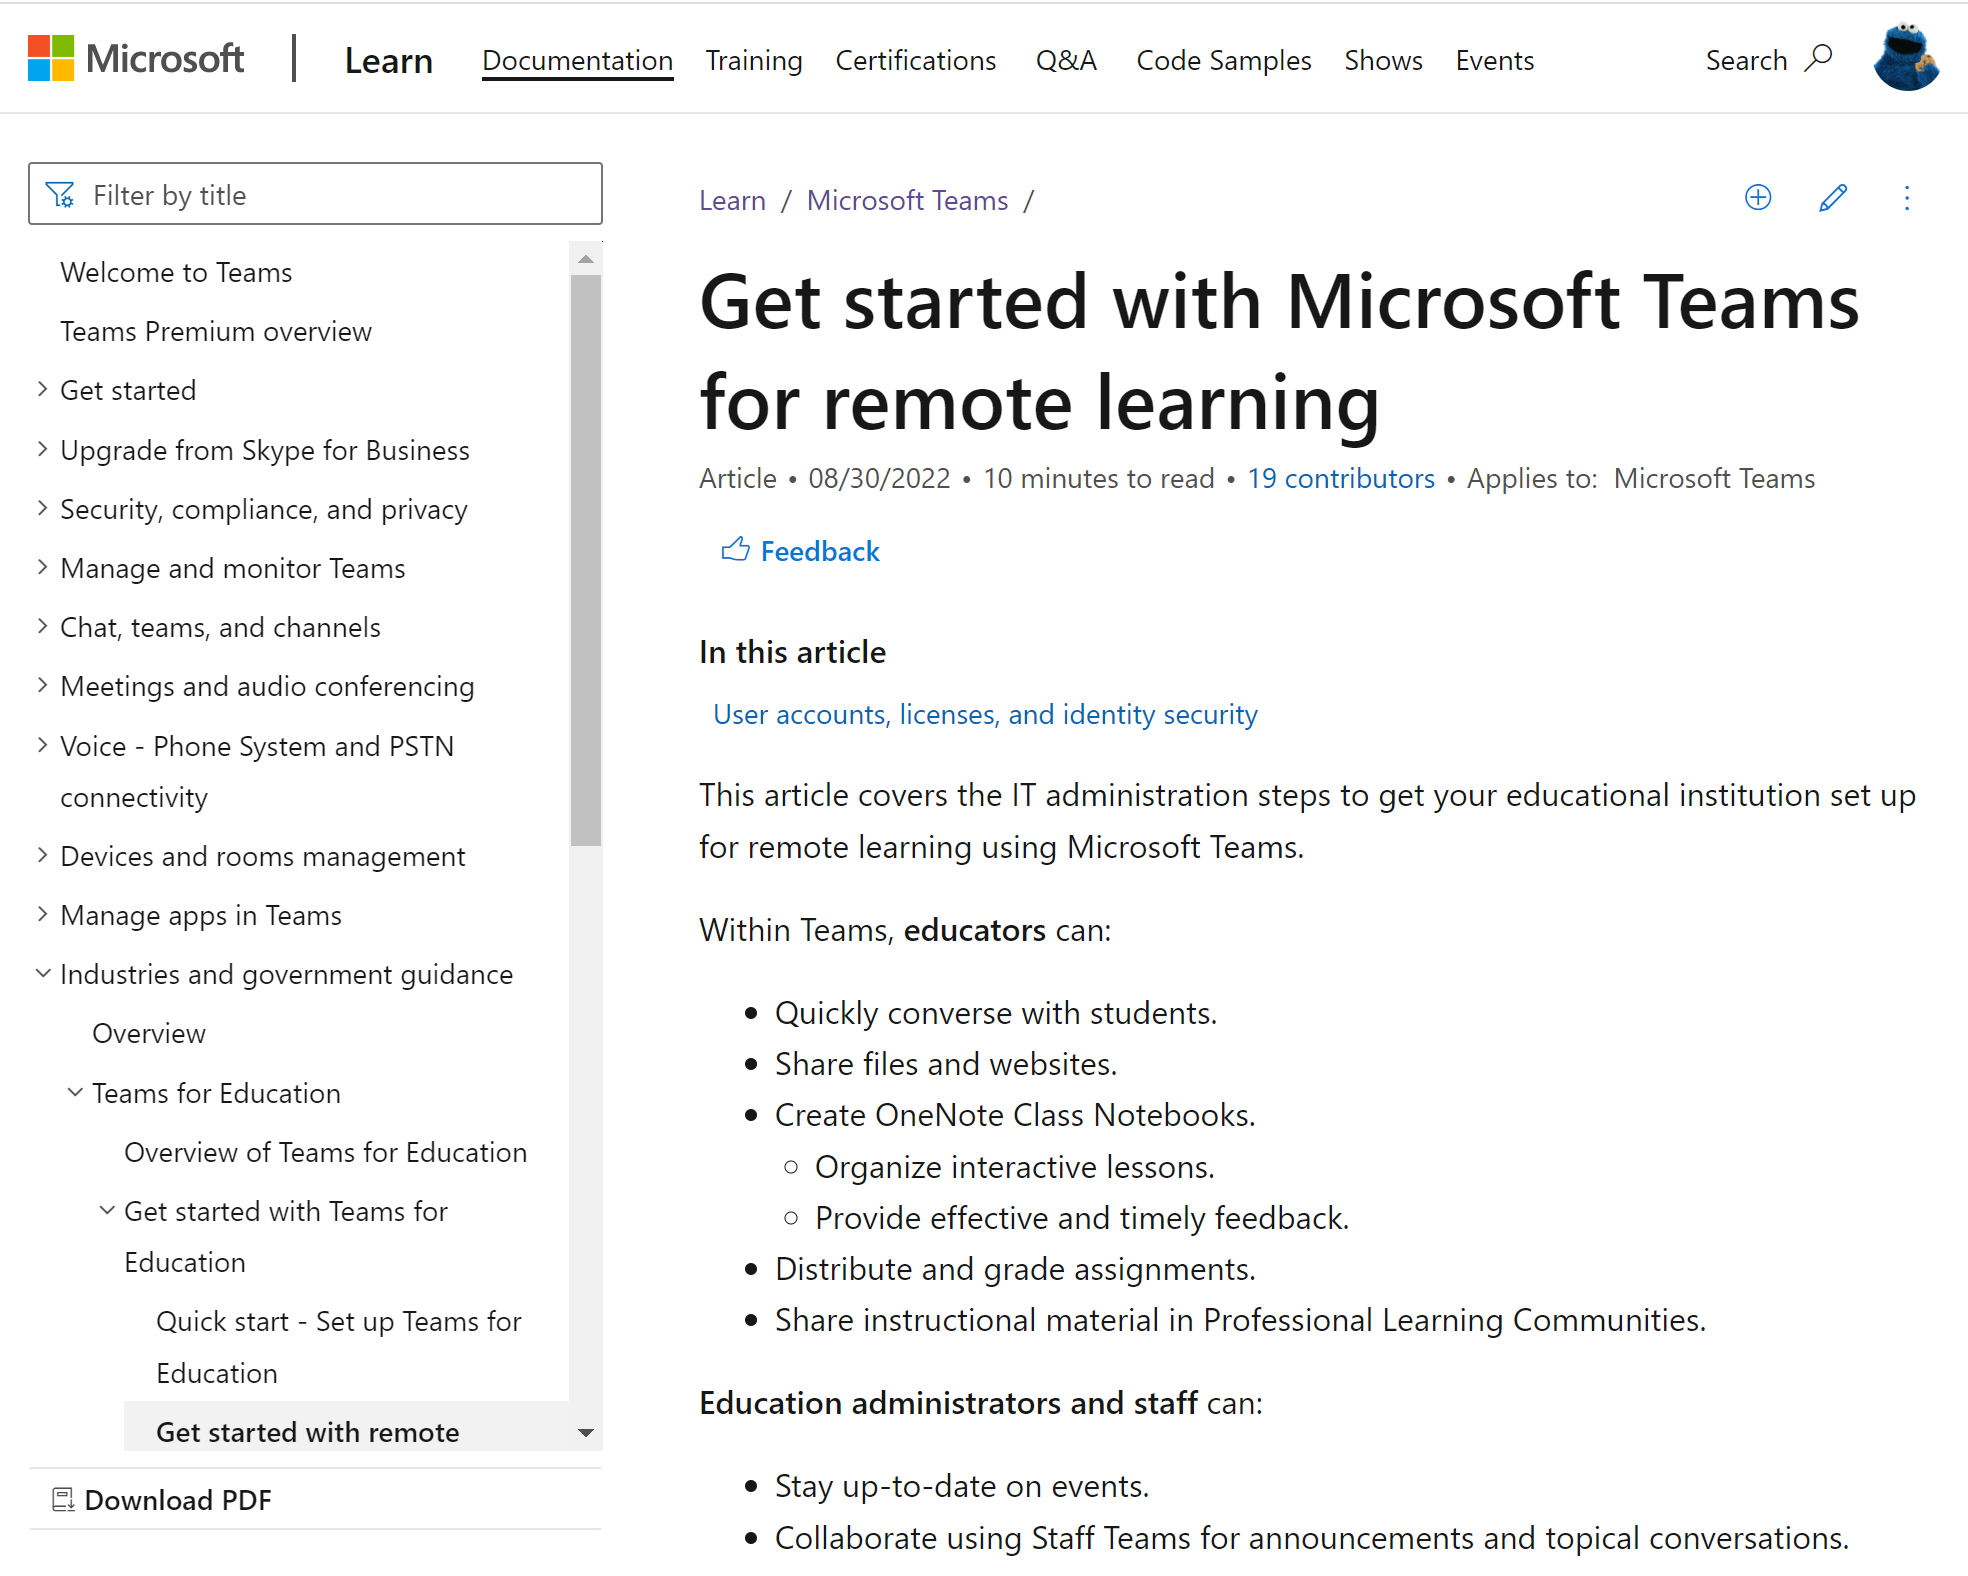 Screenshot of the article 'Get started with Microsoft Teams for remote learning